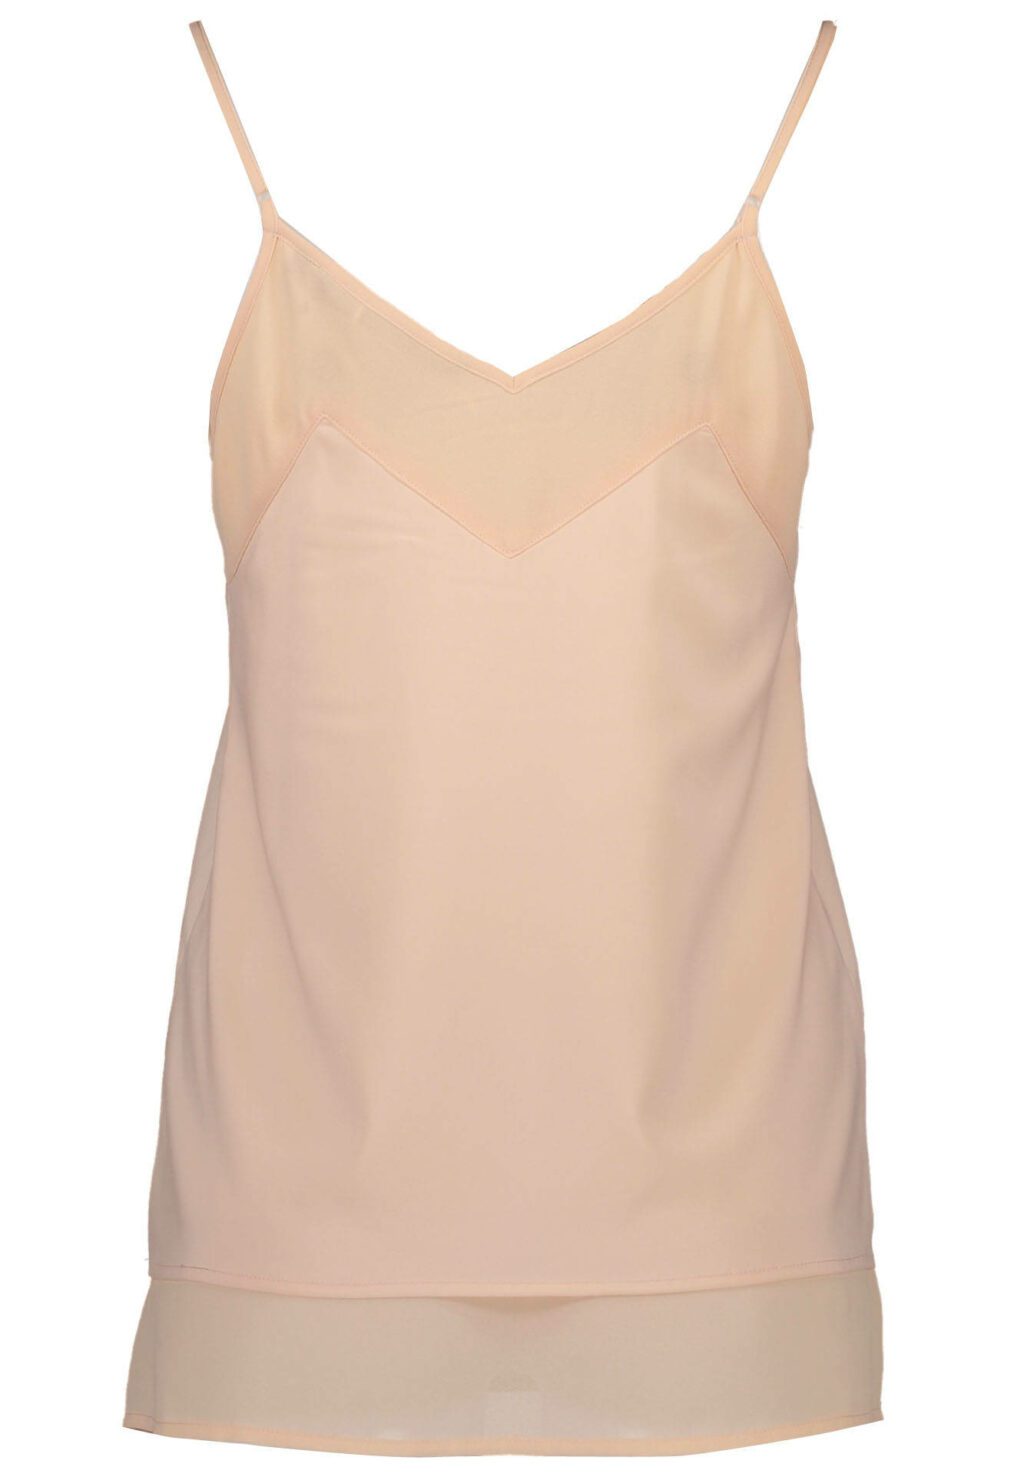 SILVIAN HEACH PINK WOMAN TANK PGP16373TO-HB-MOGGIA_ROSA_ROSA-CIPRIA